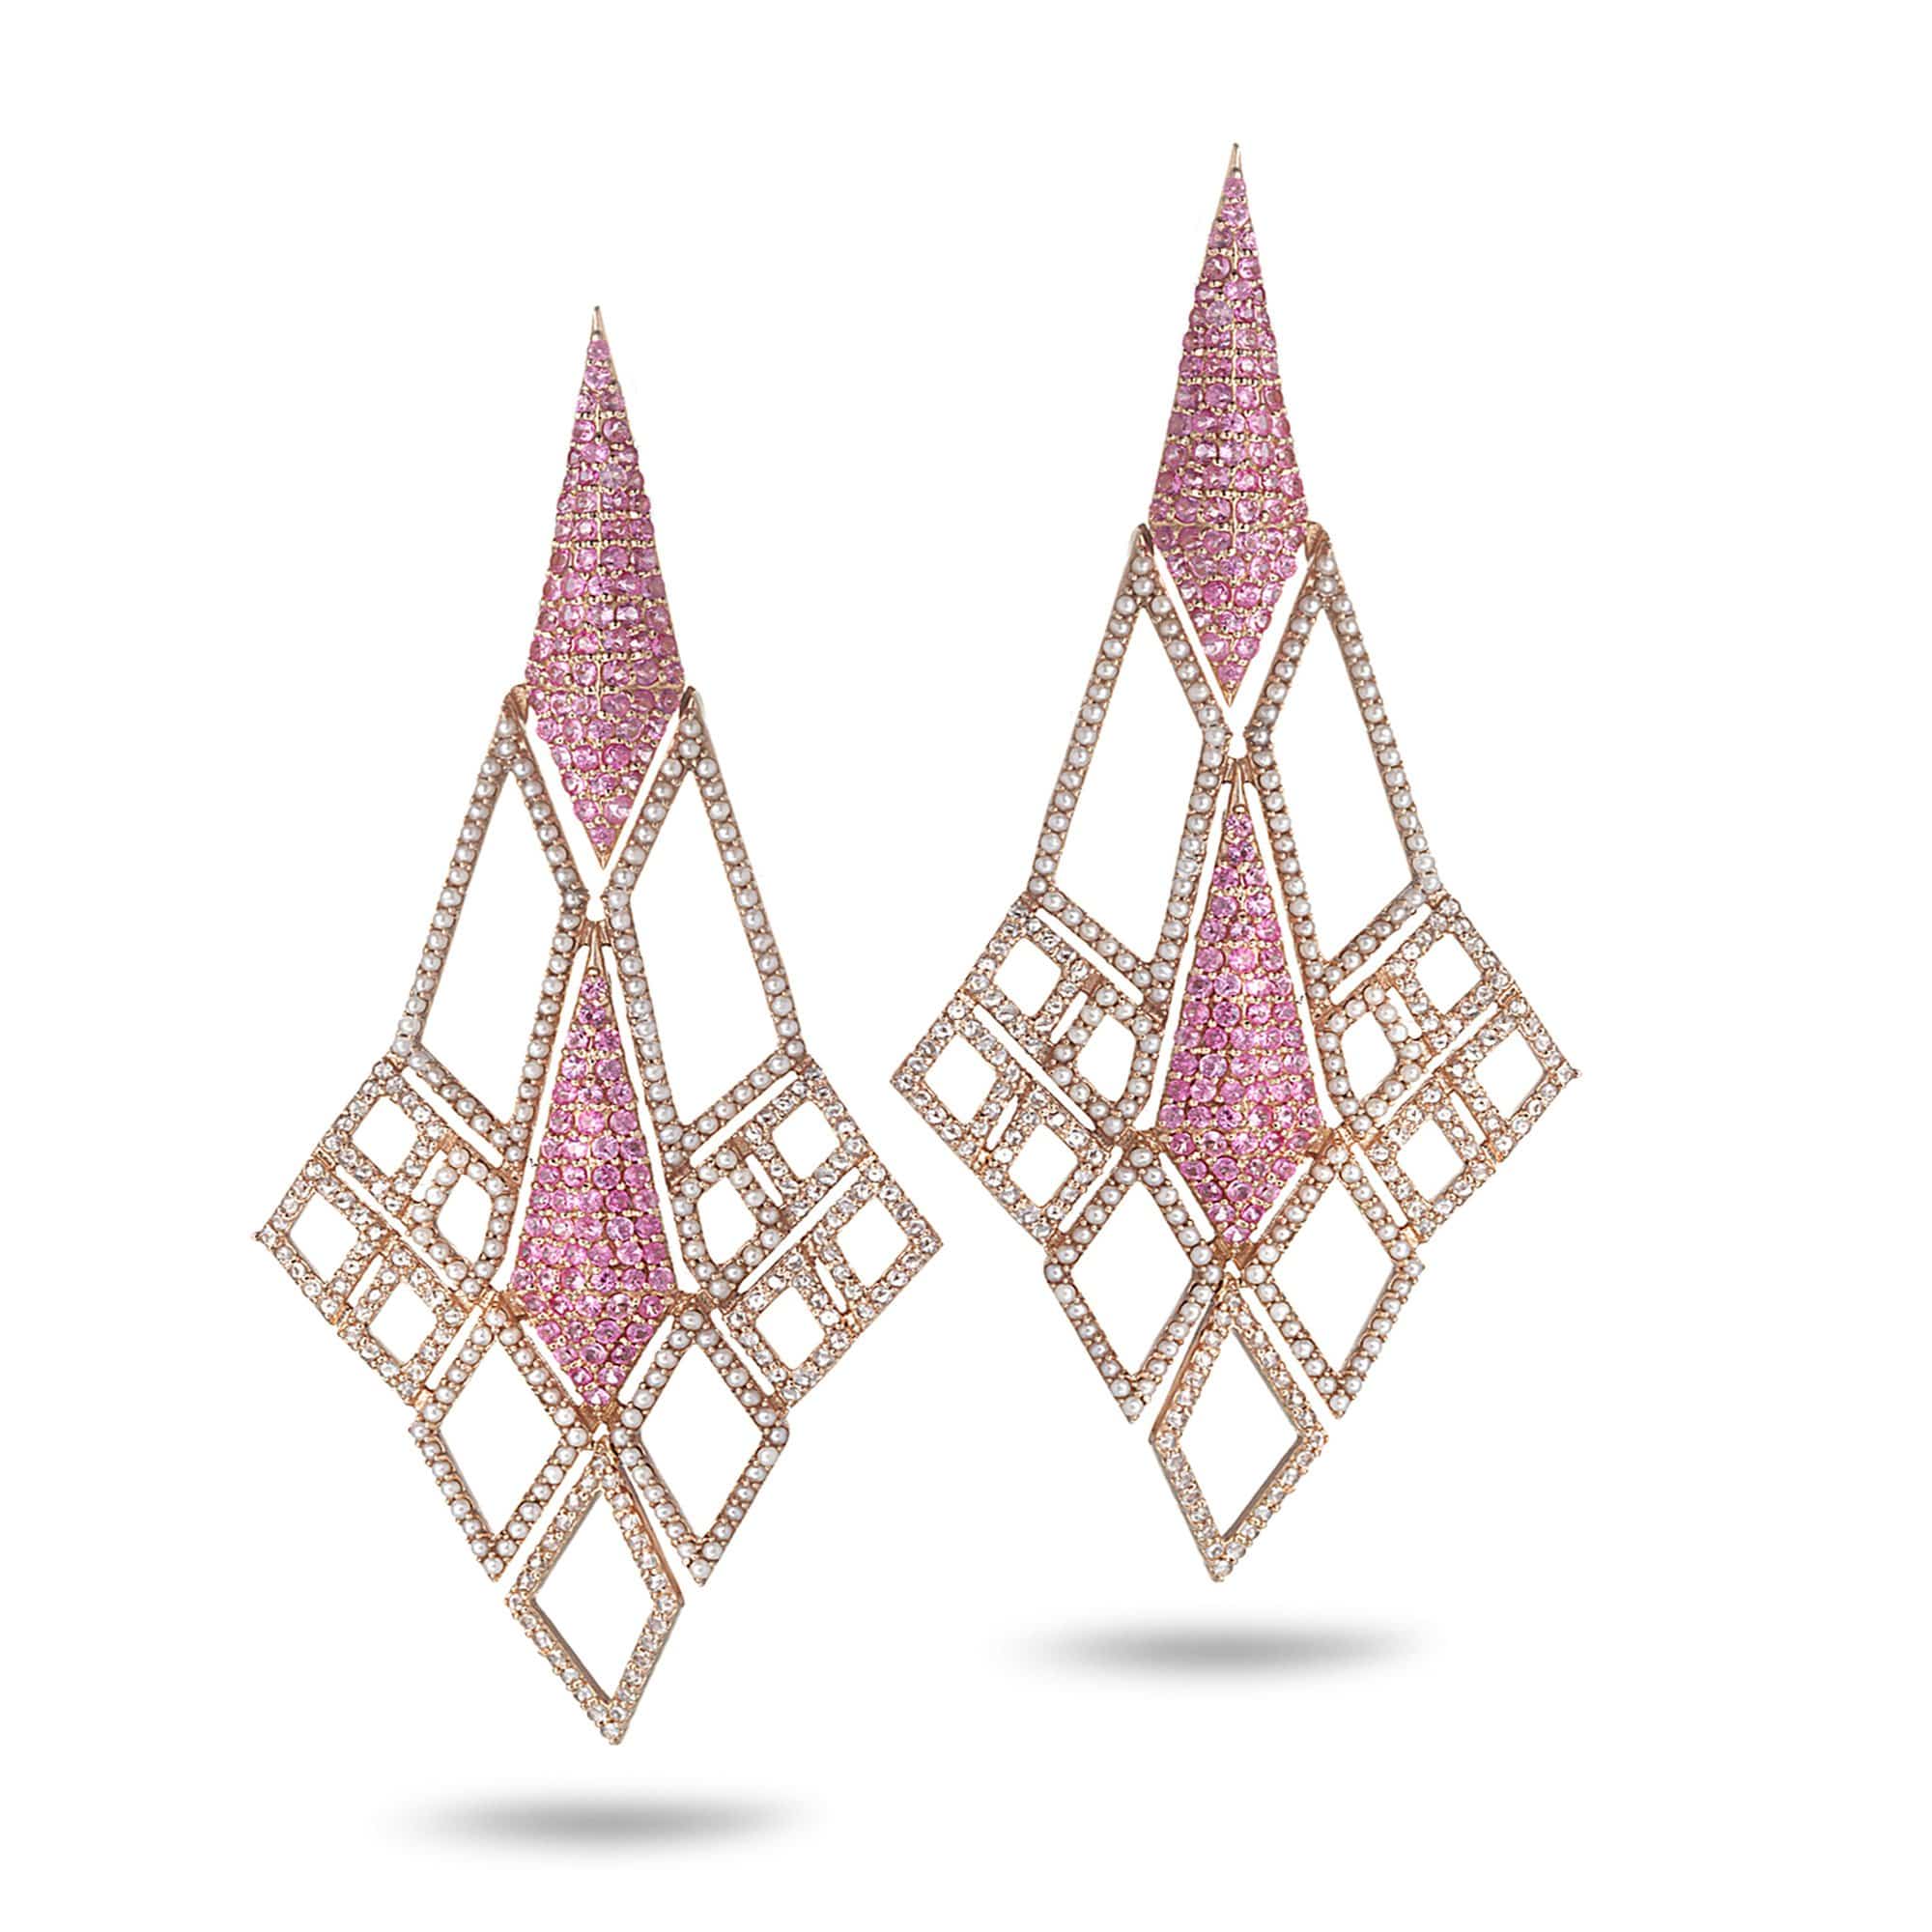 Sagrada Glory Earring in 18K Rose Gold with Pearls and Diamonds - Coomi